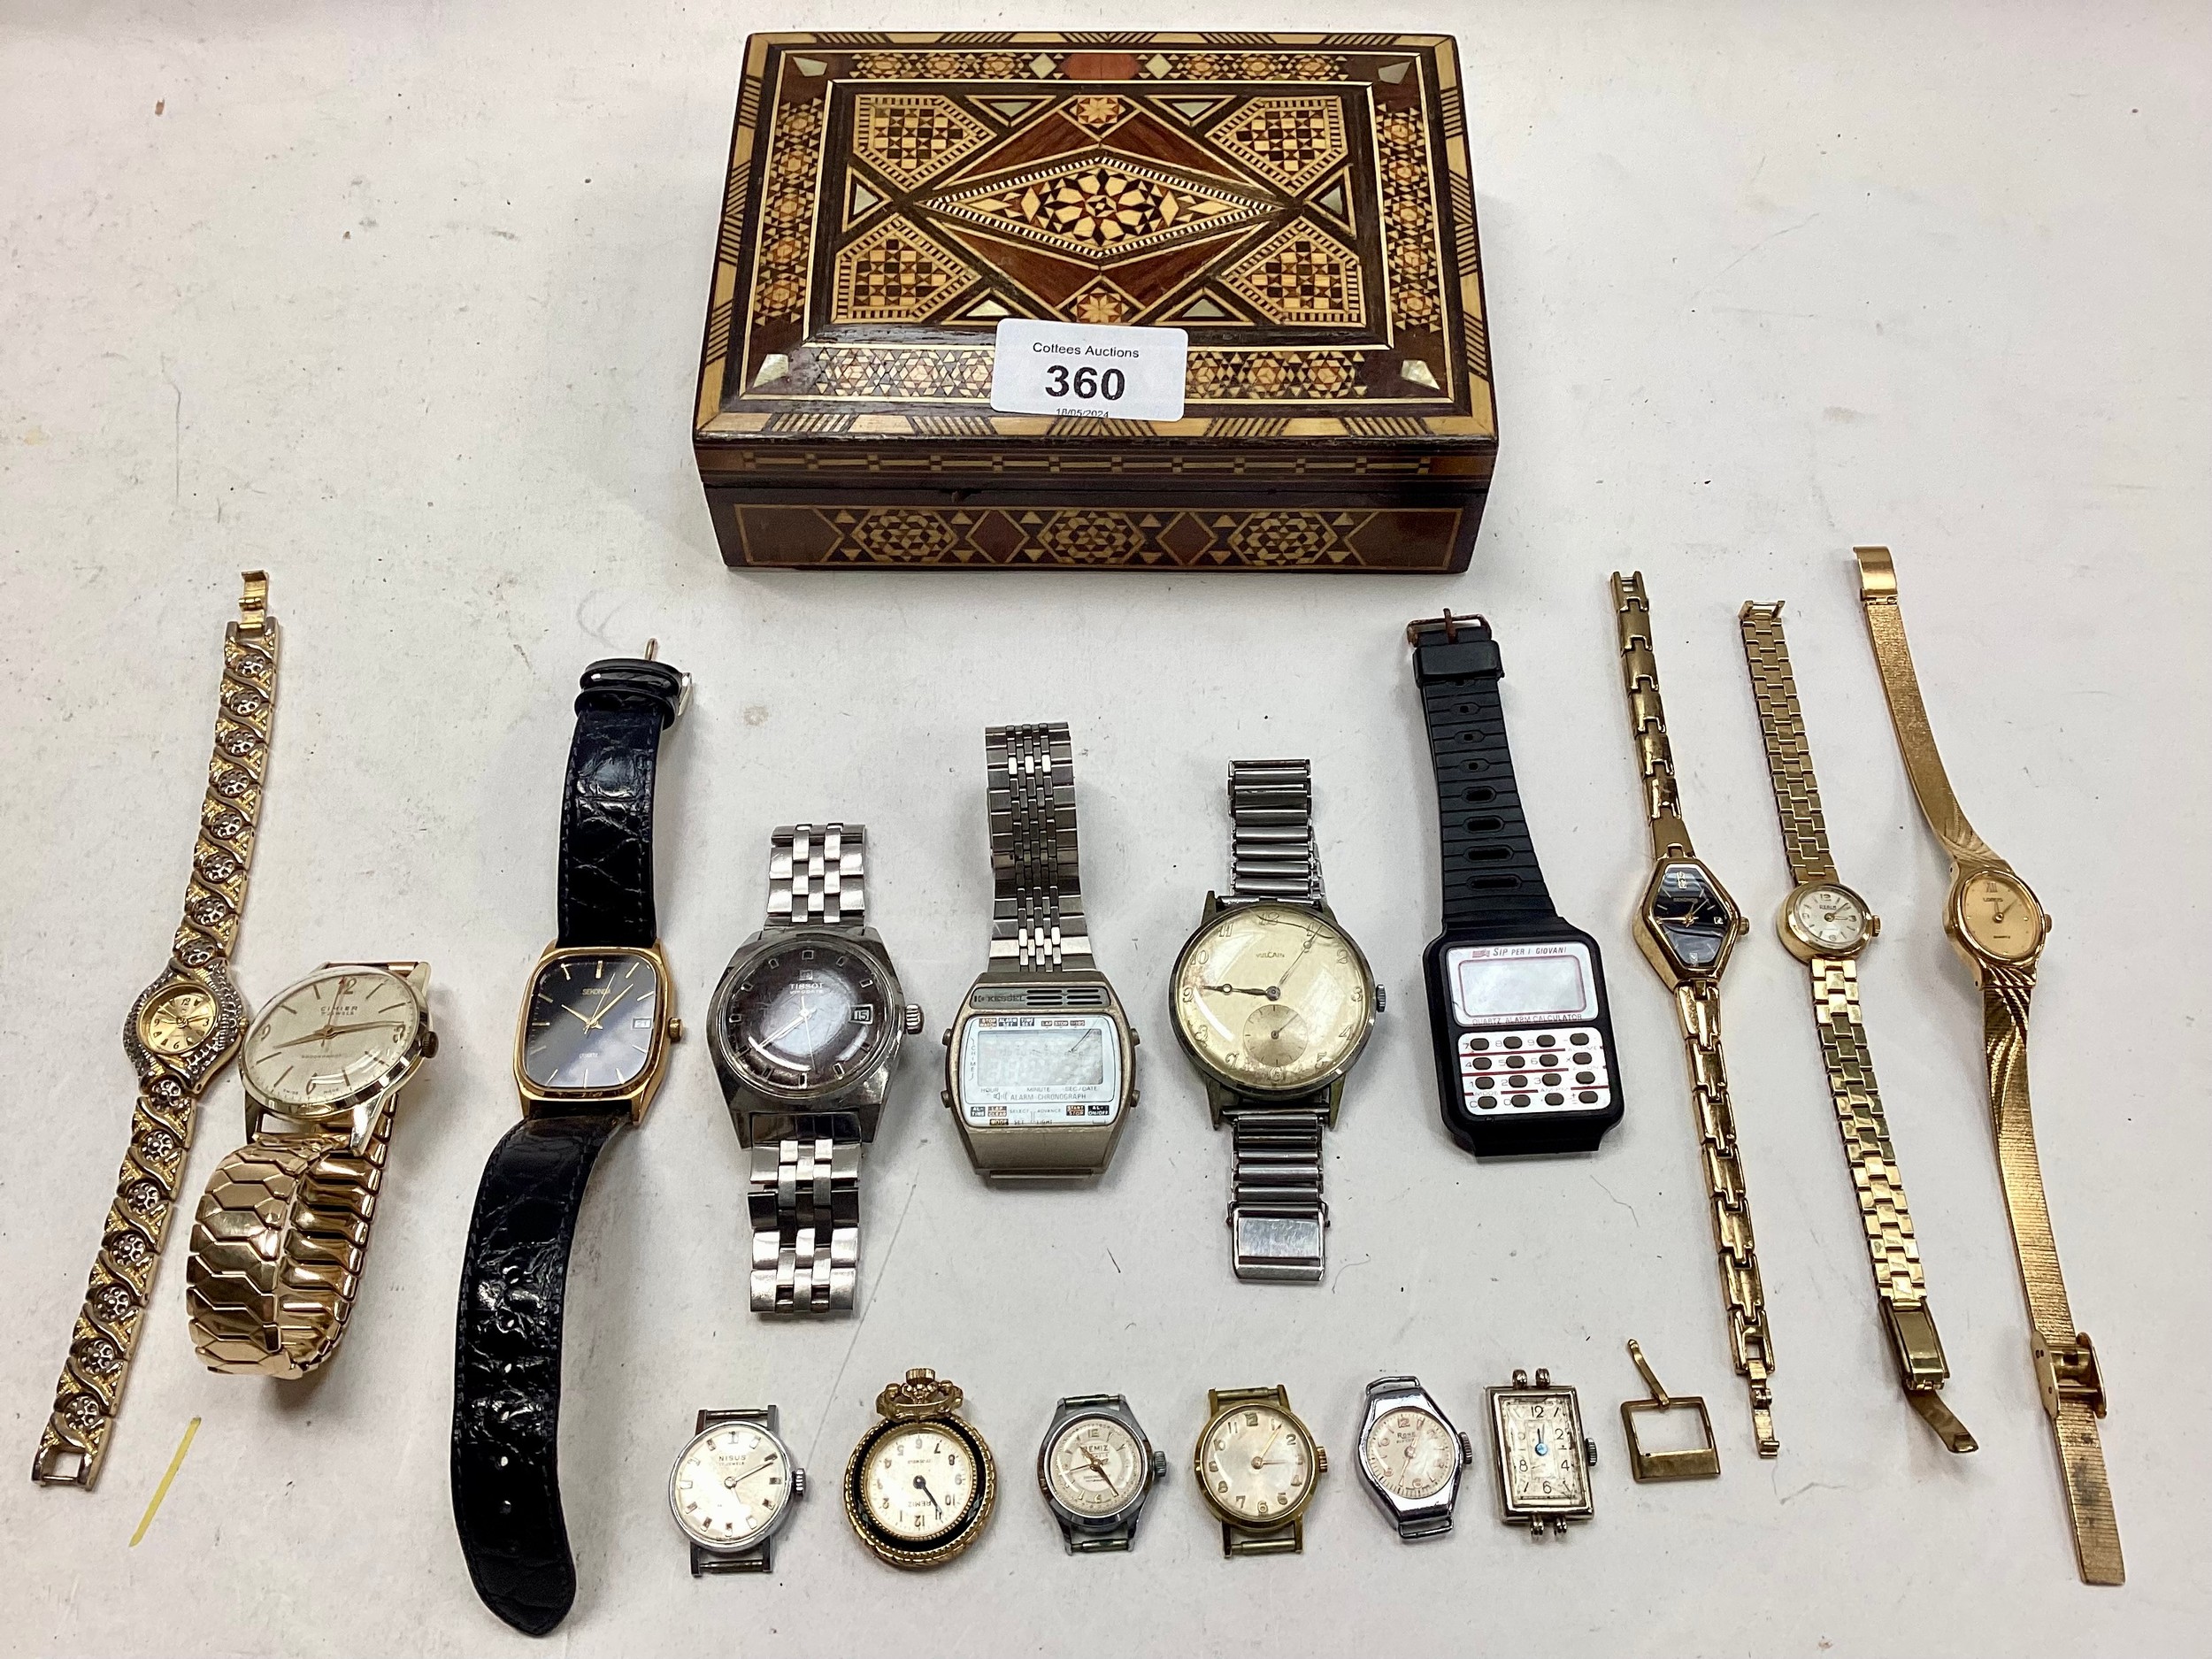 Mixed gents and Ladies watches in a Tunbridge ware box - Image 2 of 2